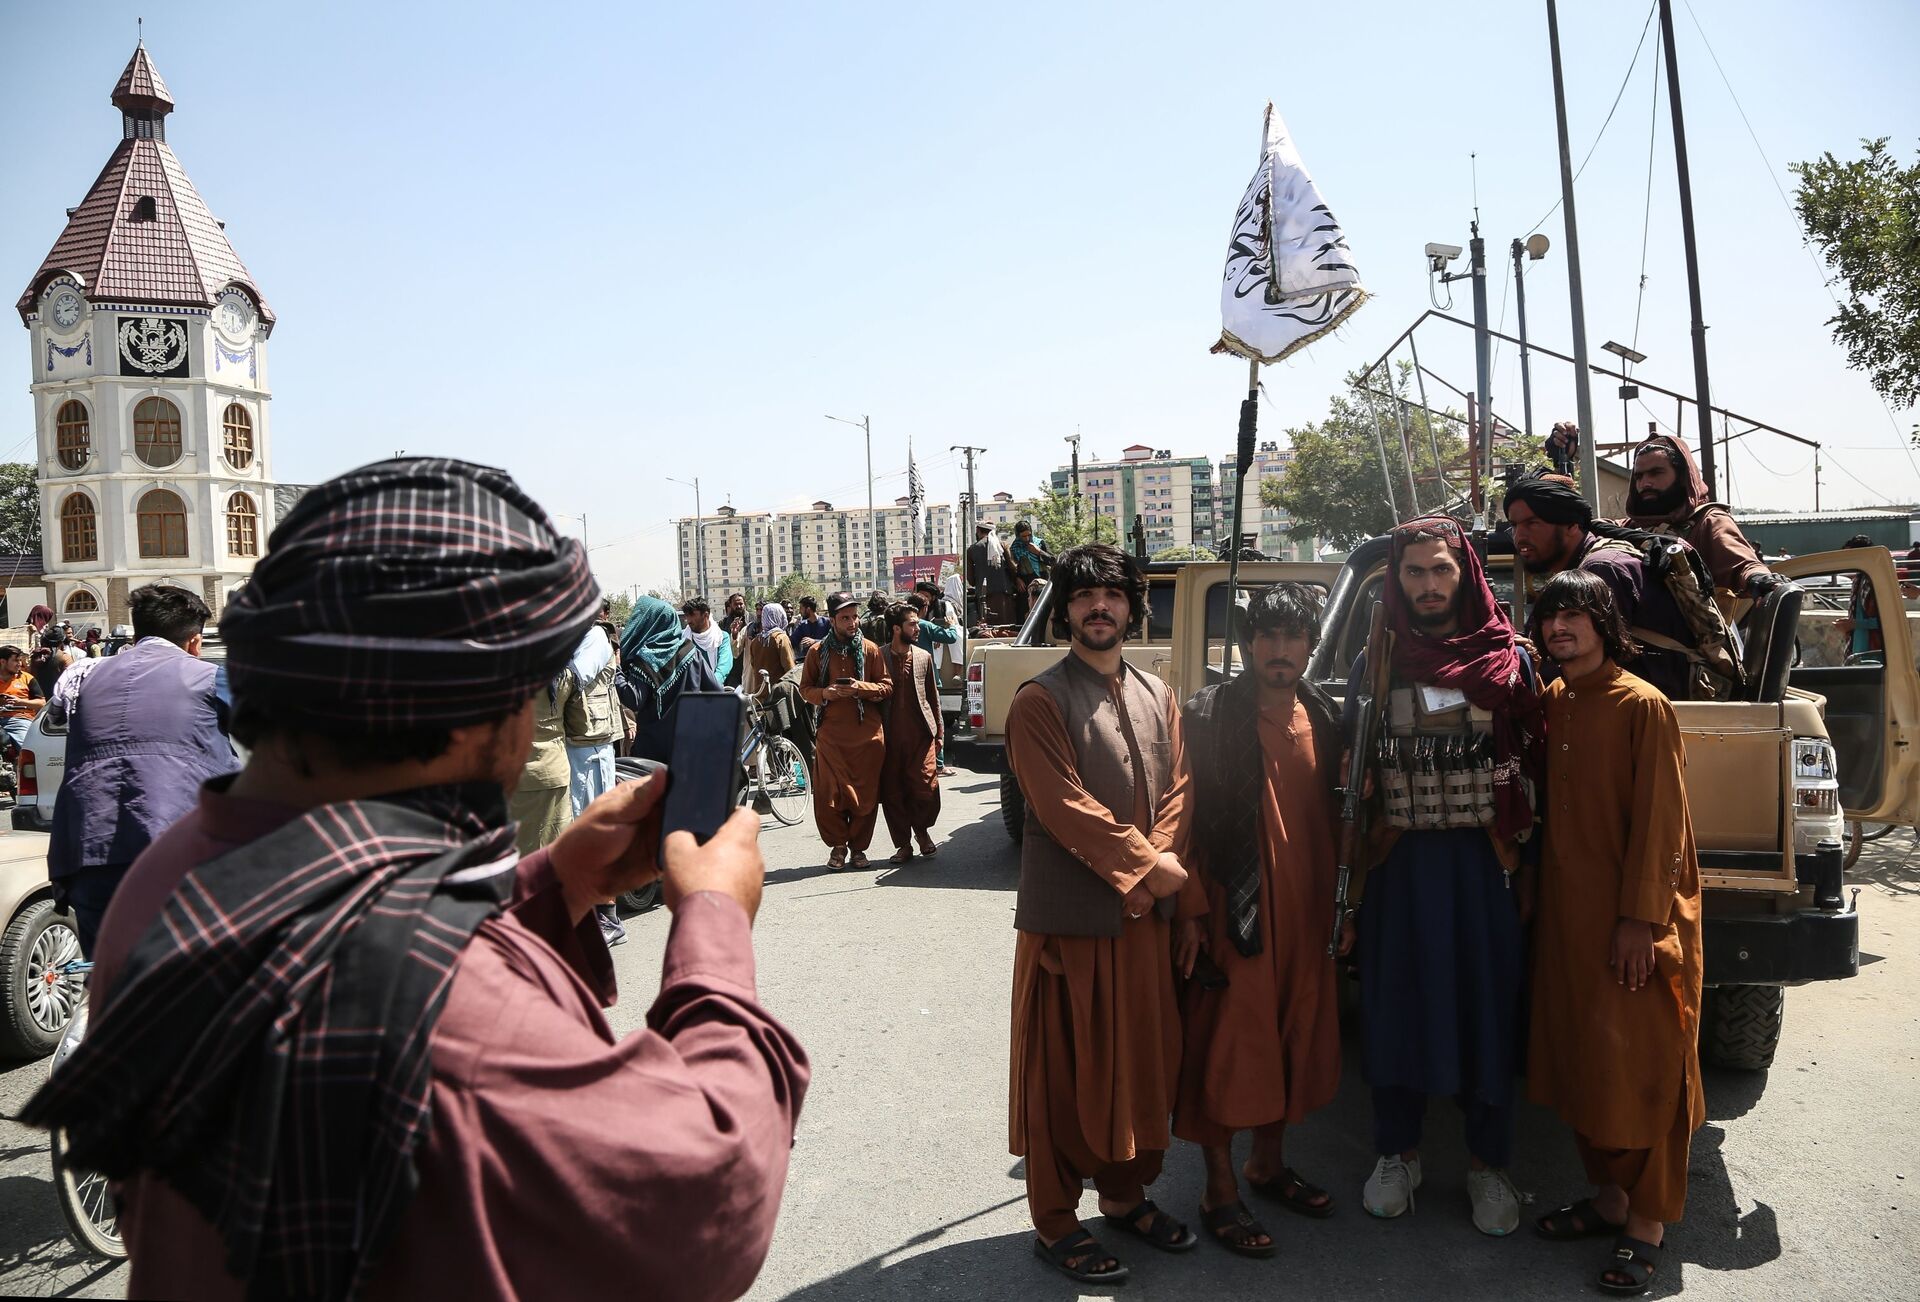 Taliban fighters (a terrorist group banned in Russia) pose for a photo in Kabul, Afghanistan.  - Sputnik Afrique, 1920, 21.09.2021